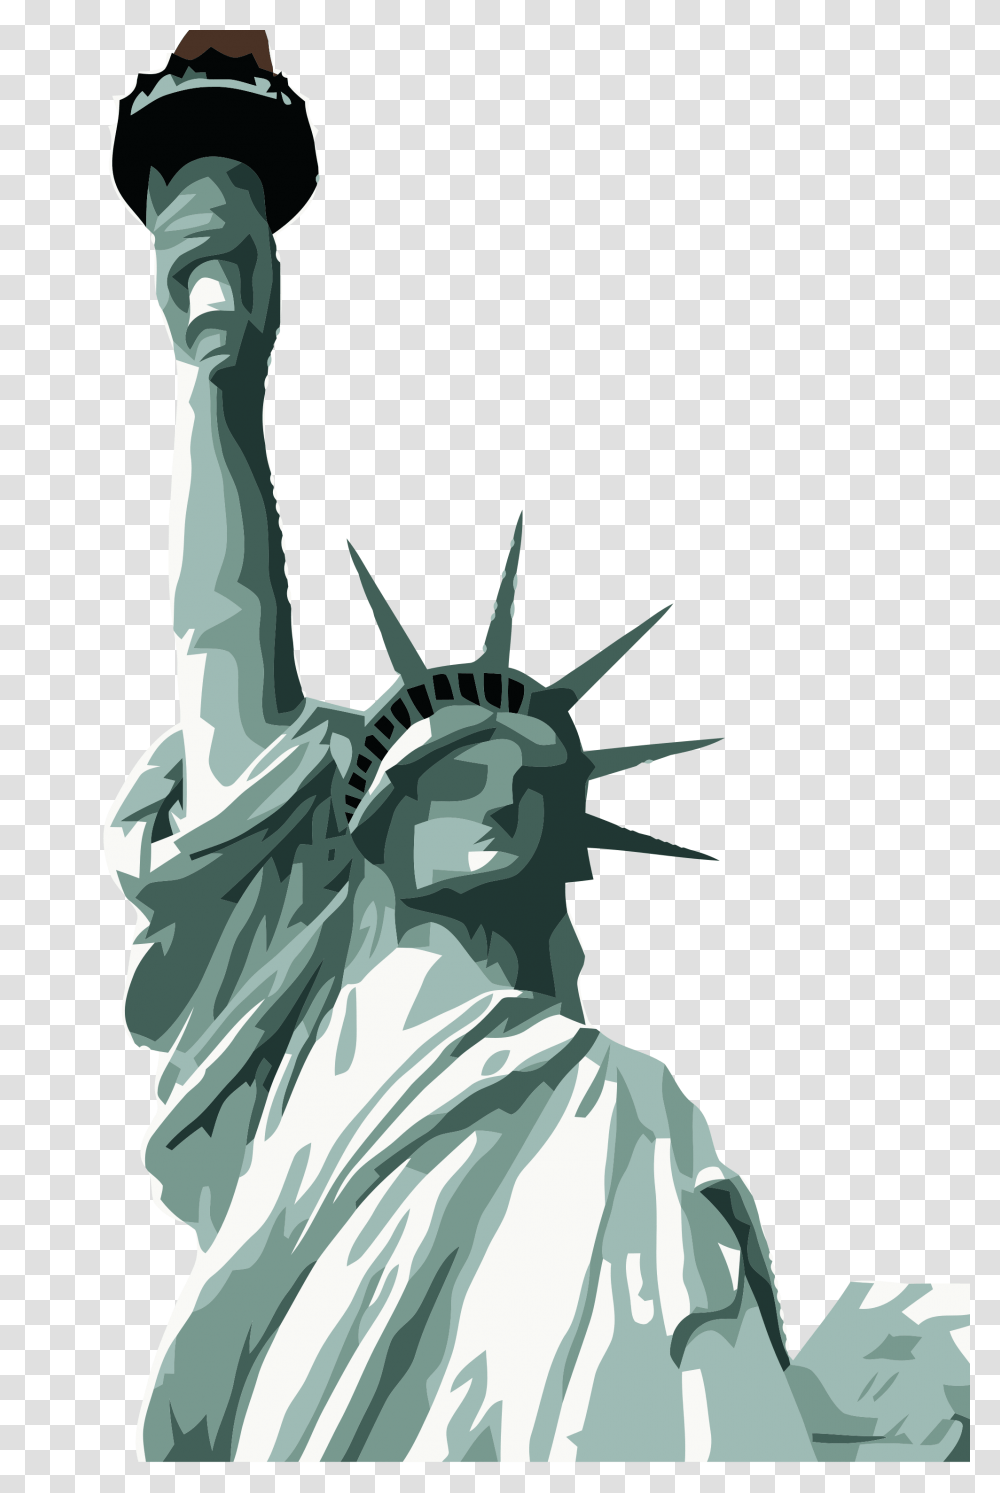 Statue Of Liberty, Architecture, Sculpture, Outdoors Transparent Png